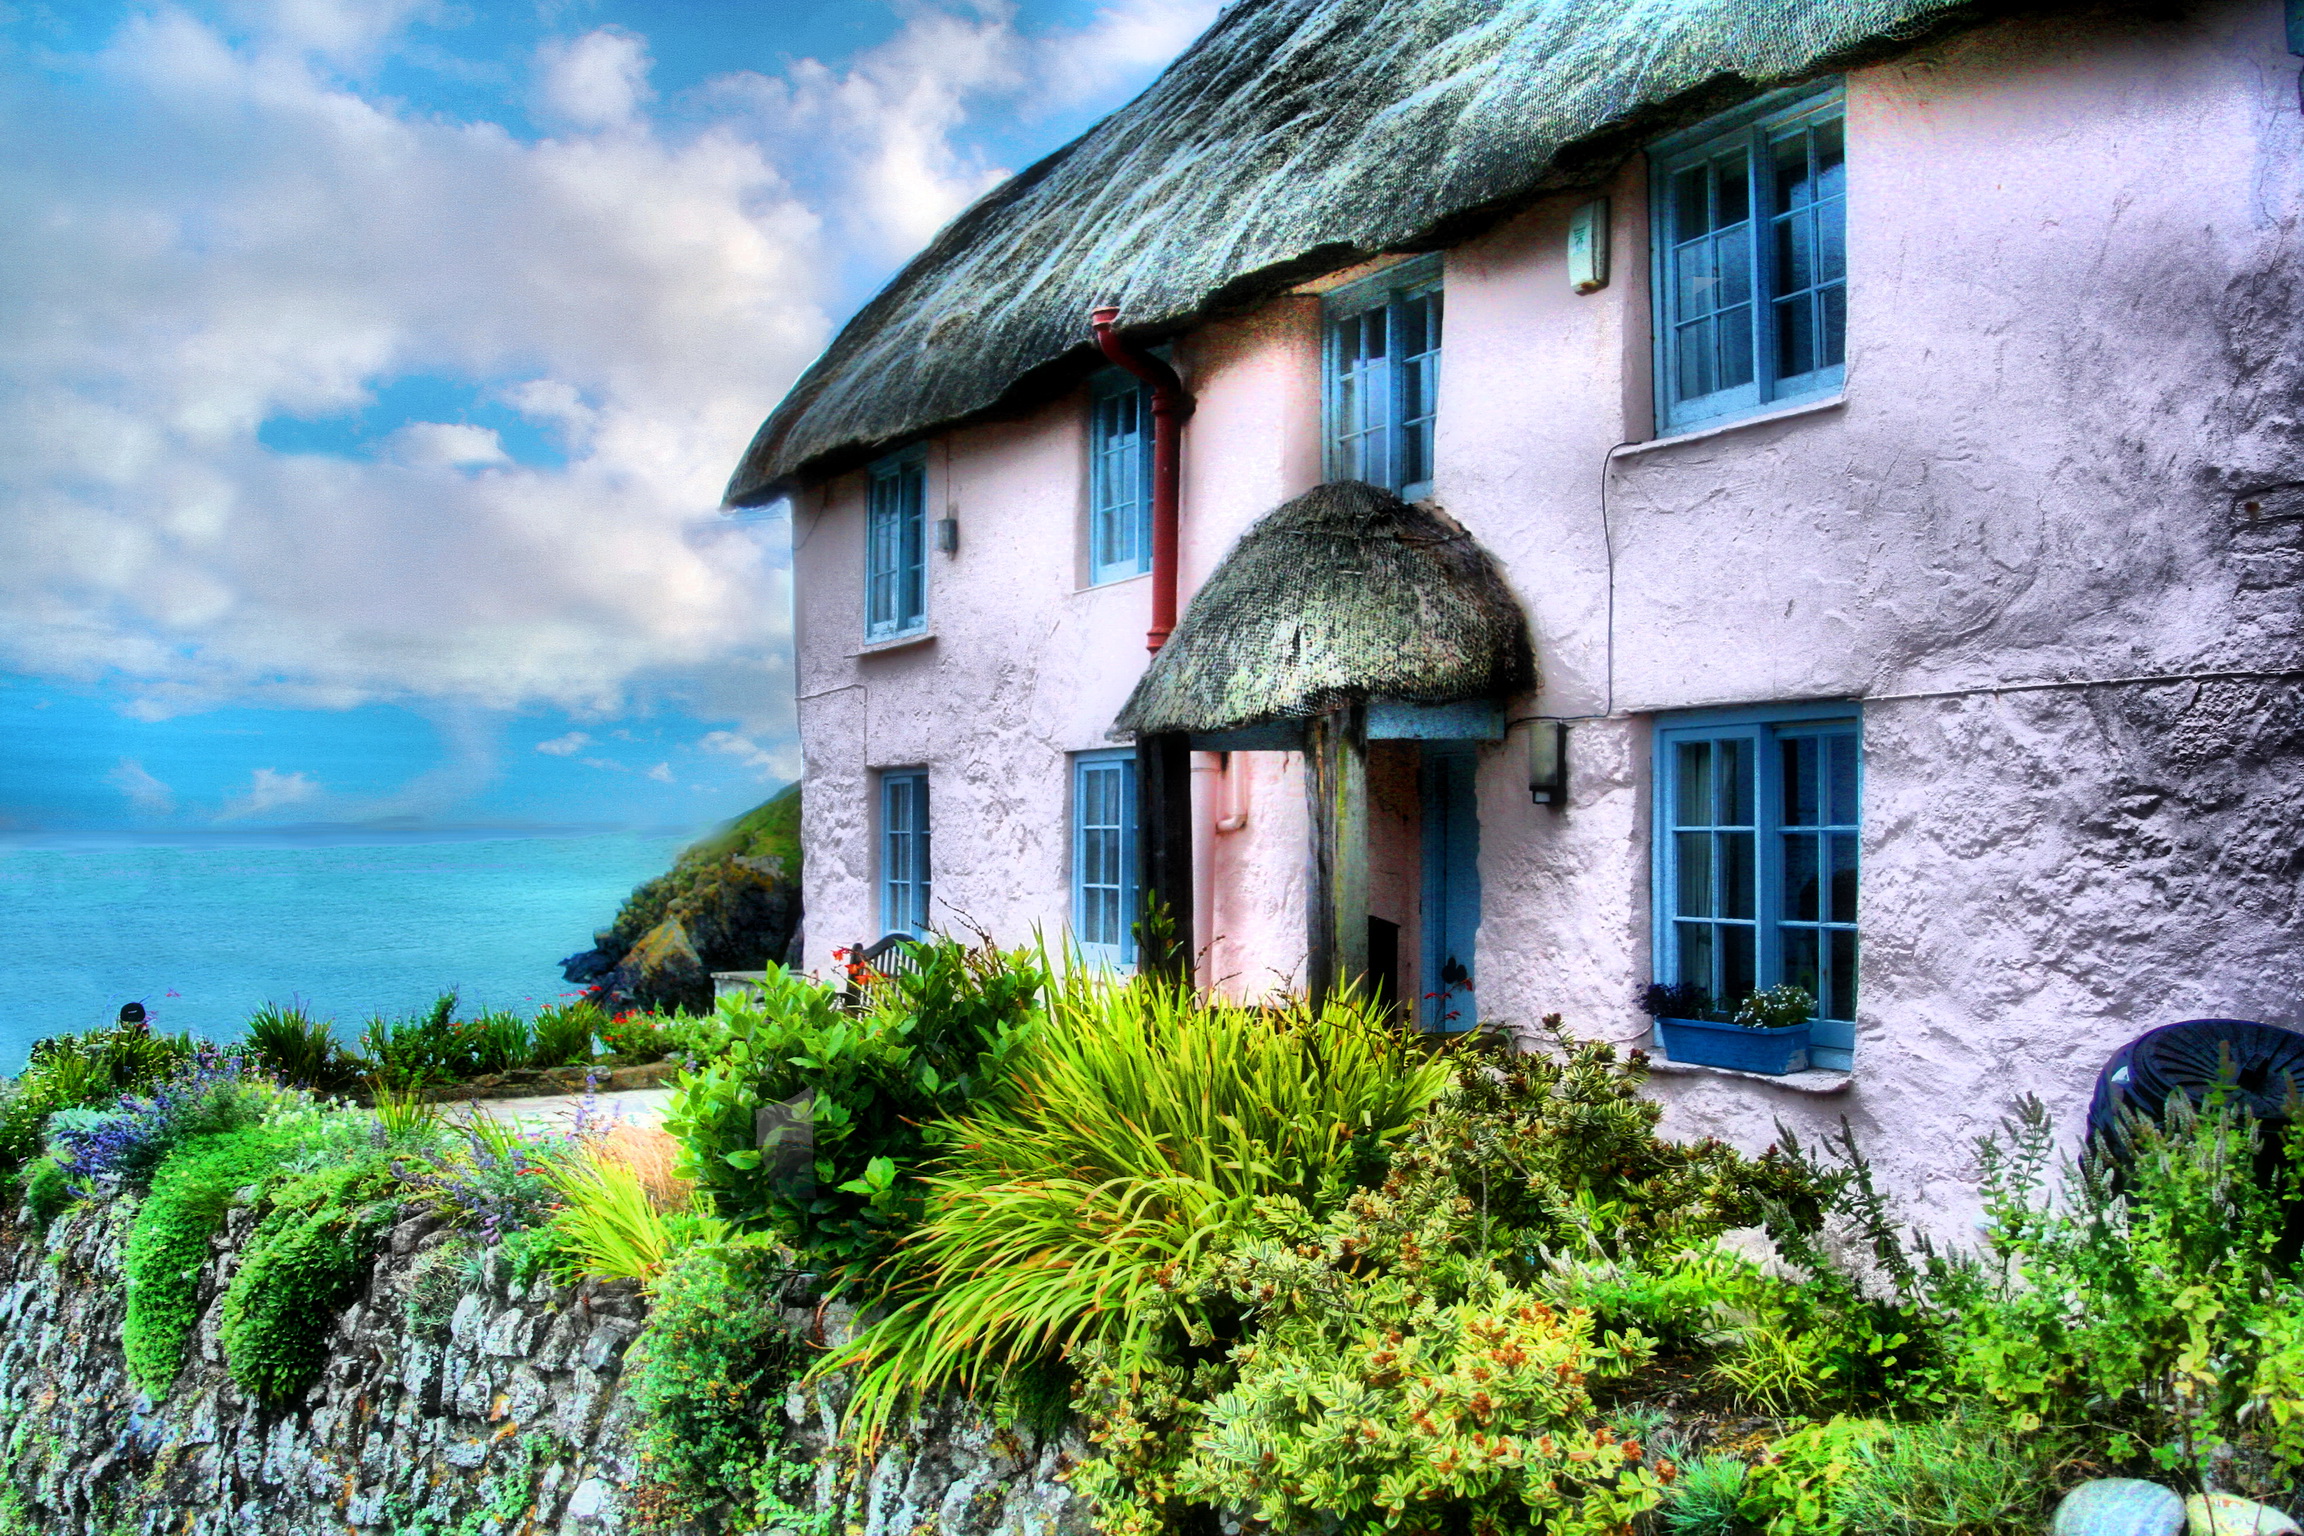 england, Houses, Cornwall, Hdr, Cities Wallpaper